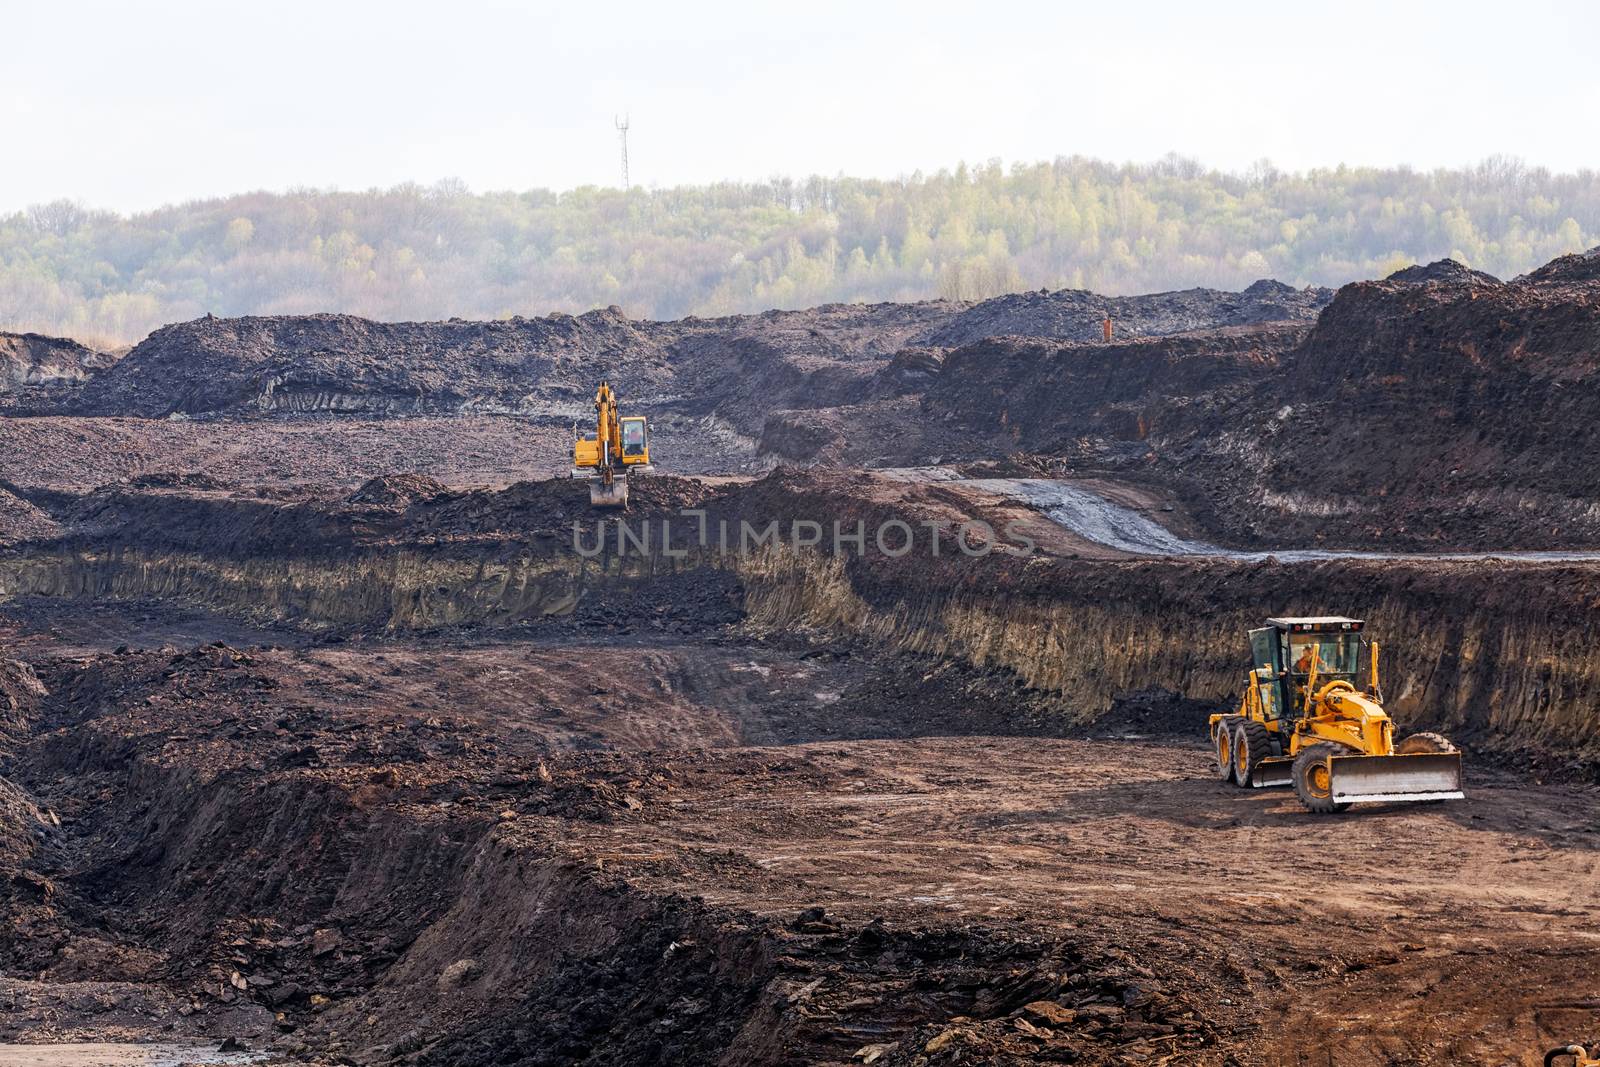 open coal mining pit with heavy machinery